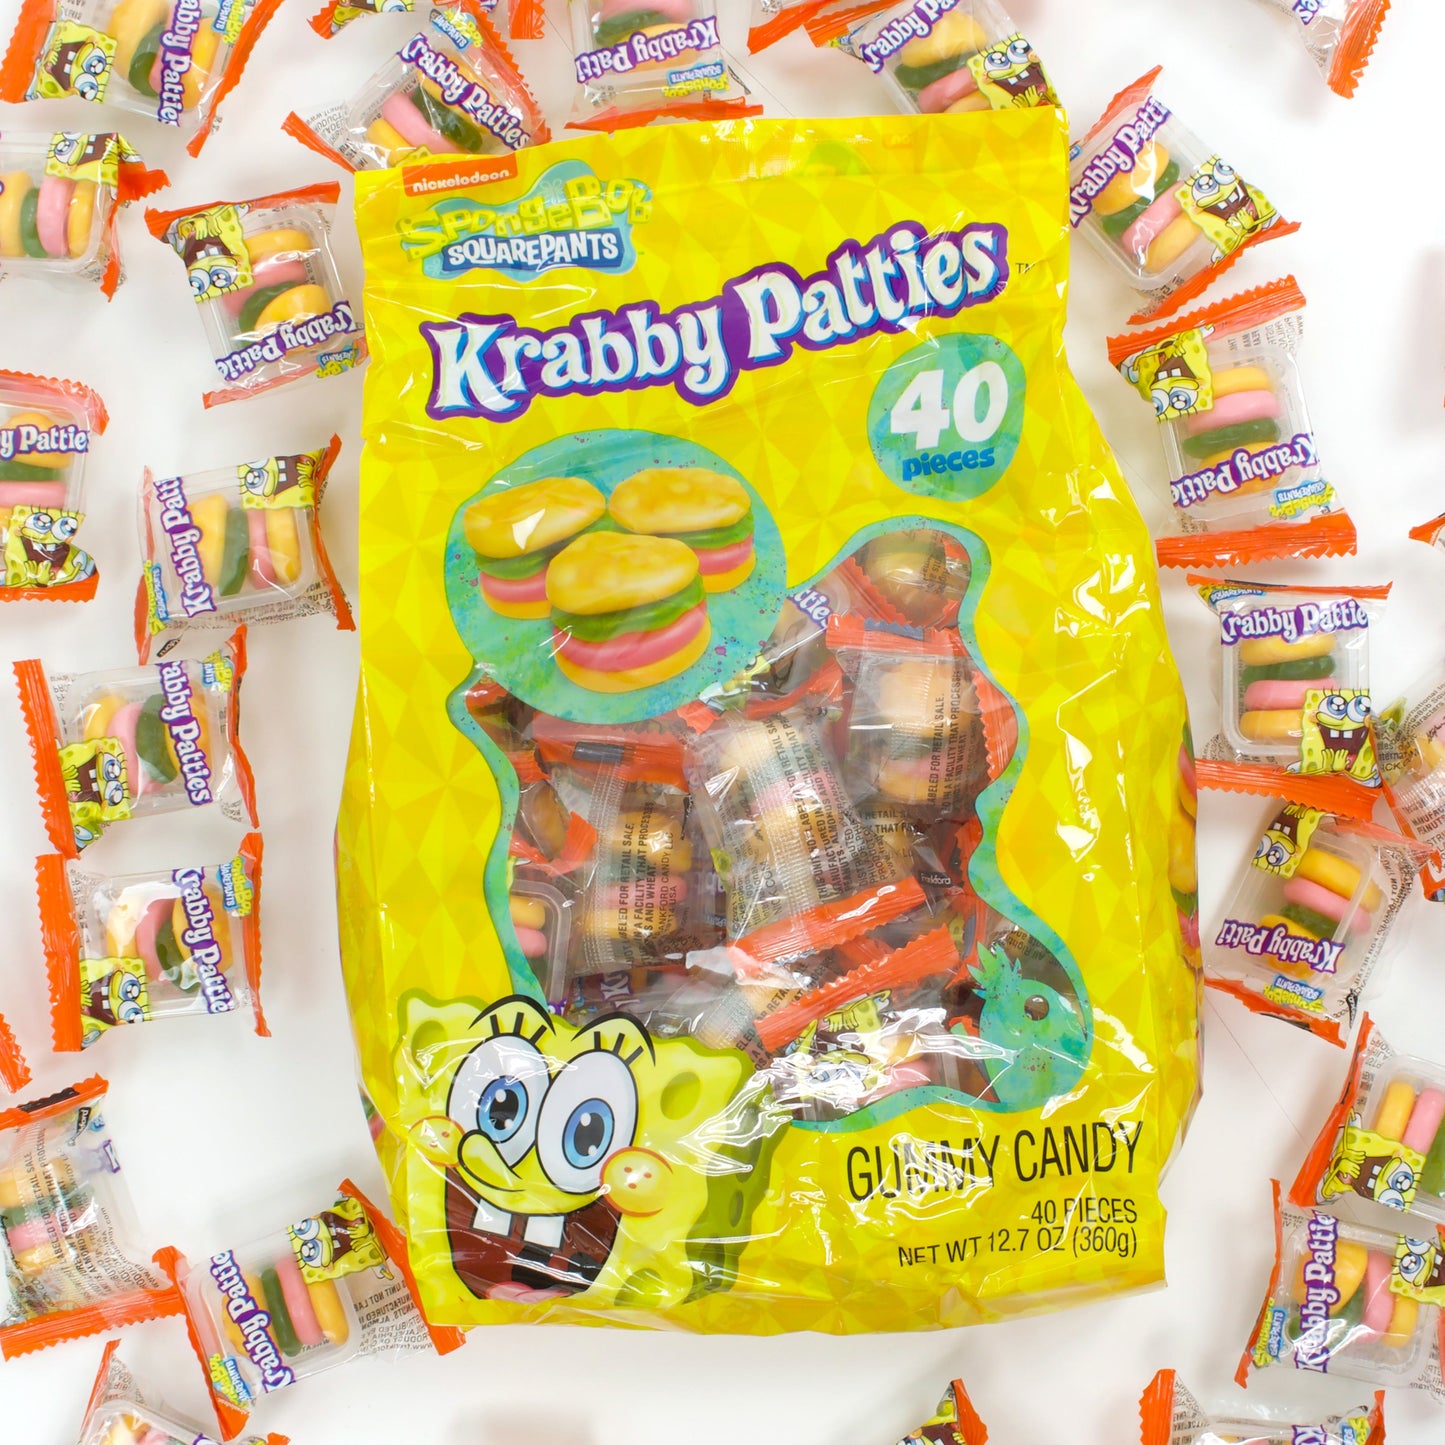 yellow bag surrounded by individually wrapped krabby patties burgers gummies